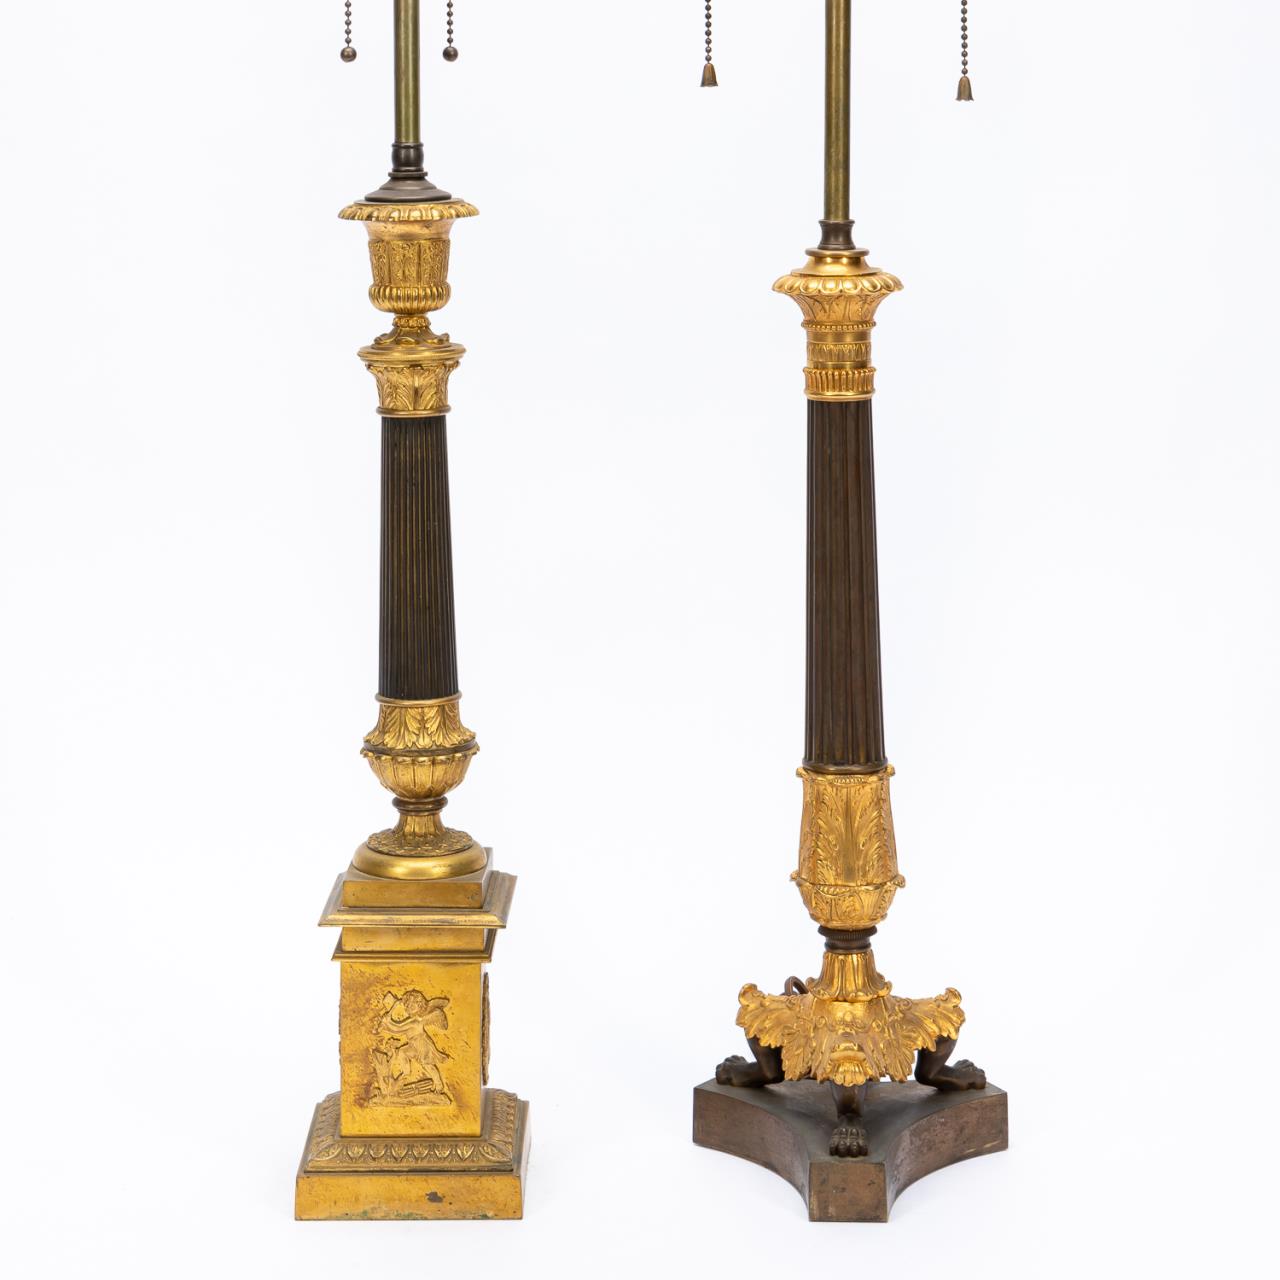 GROUP OF 2 19TH C FRENCH GILT 35c584